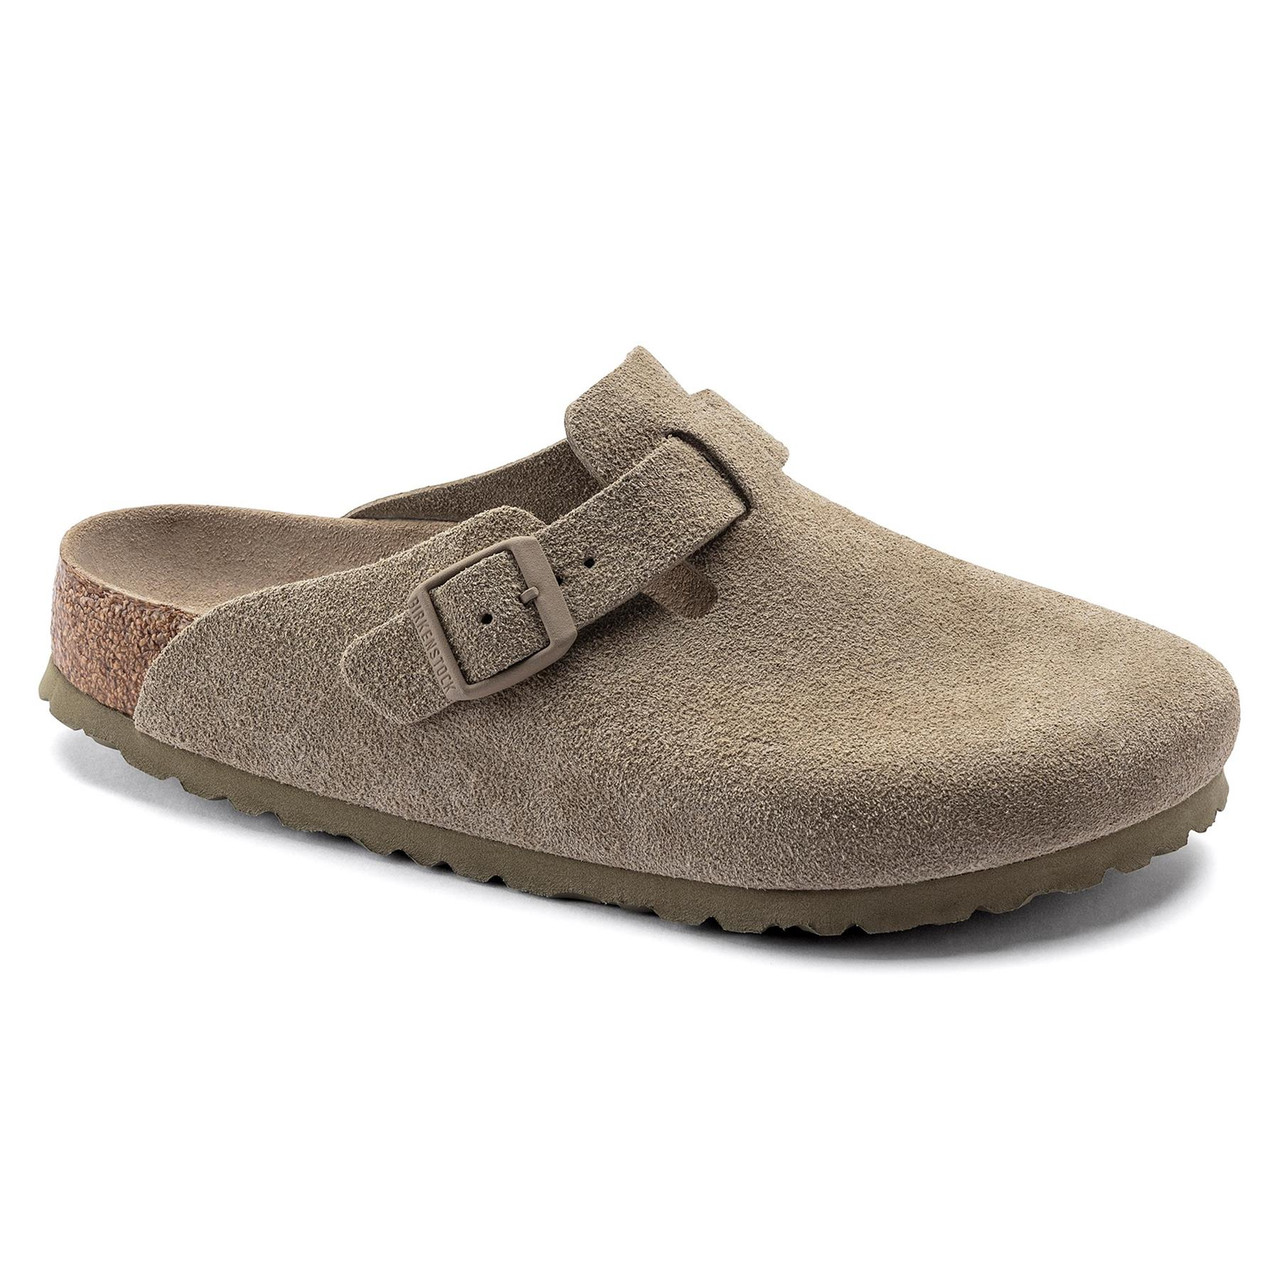 What features does the Birkenstock Unisex Boston Soft Footbed Suede Leather Clog have?